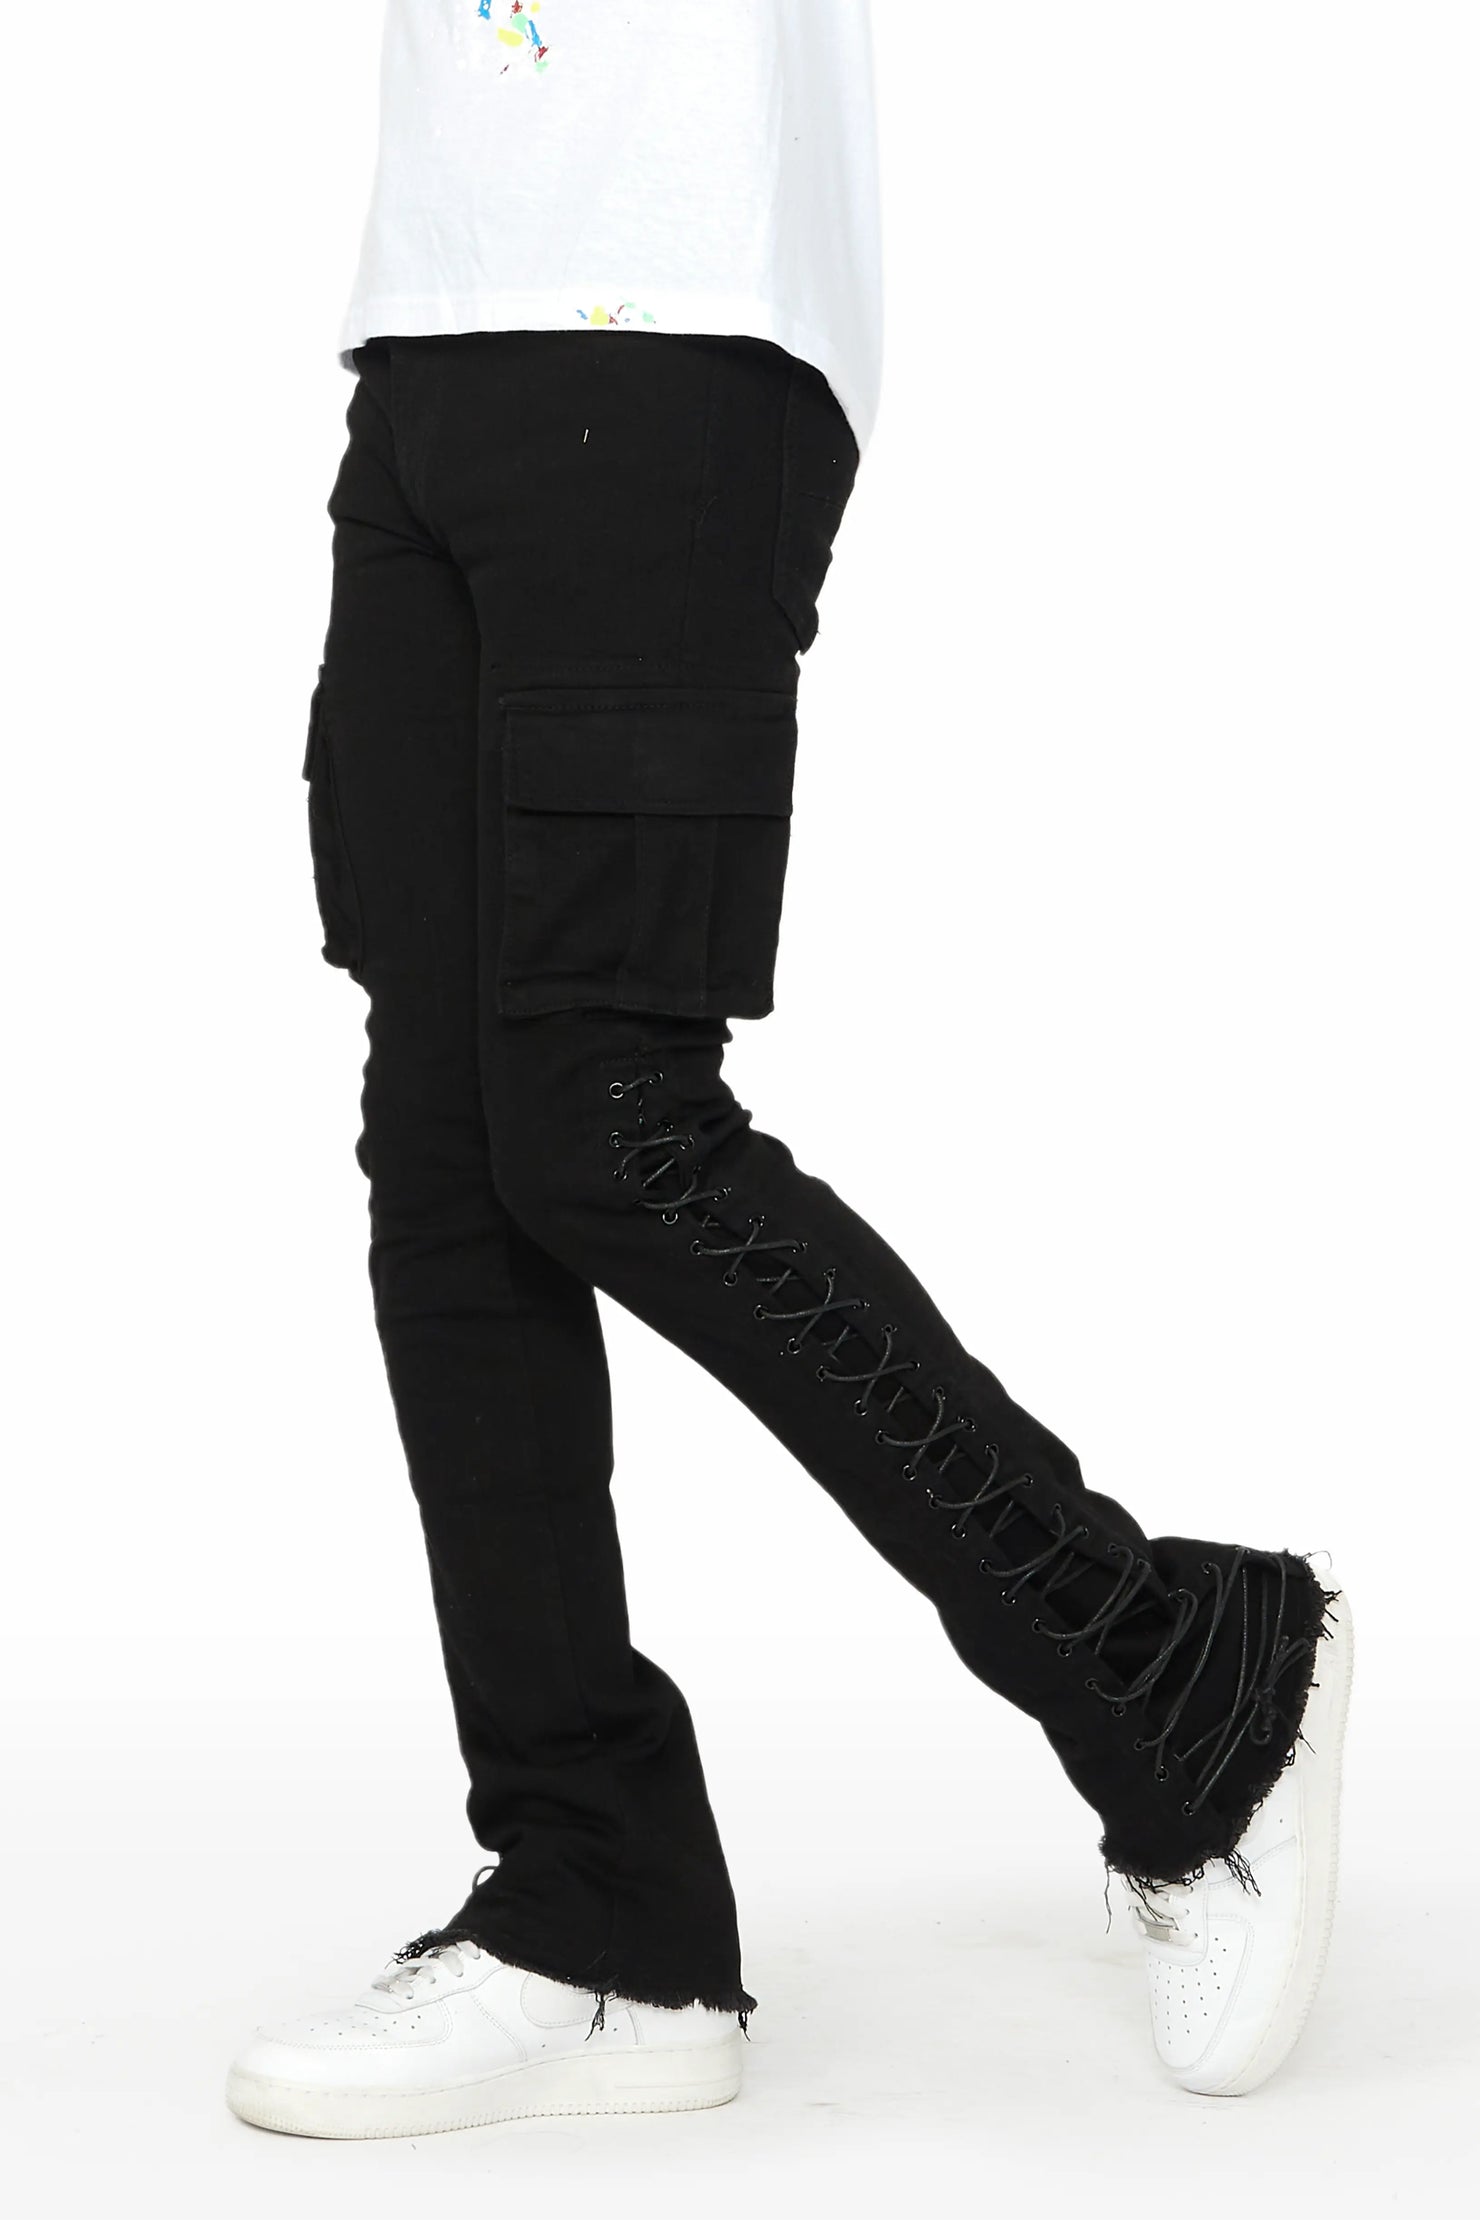 Ronoh Black Stacked Flare Jean